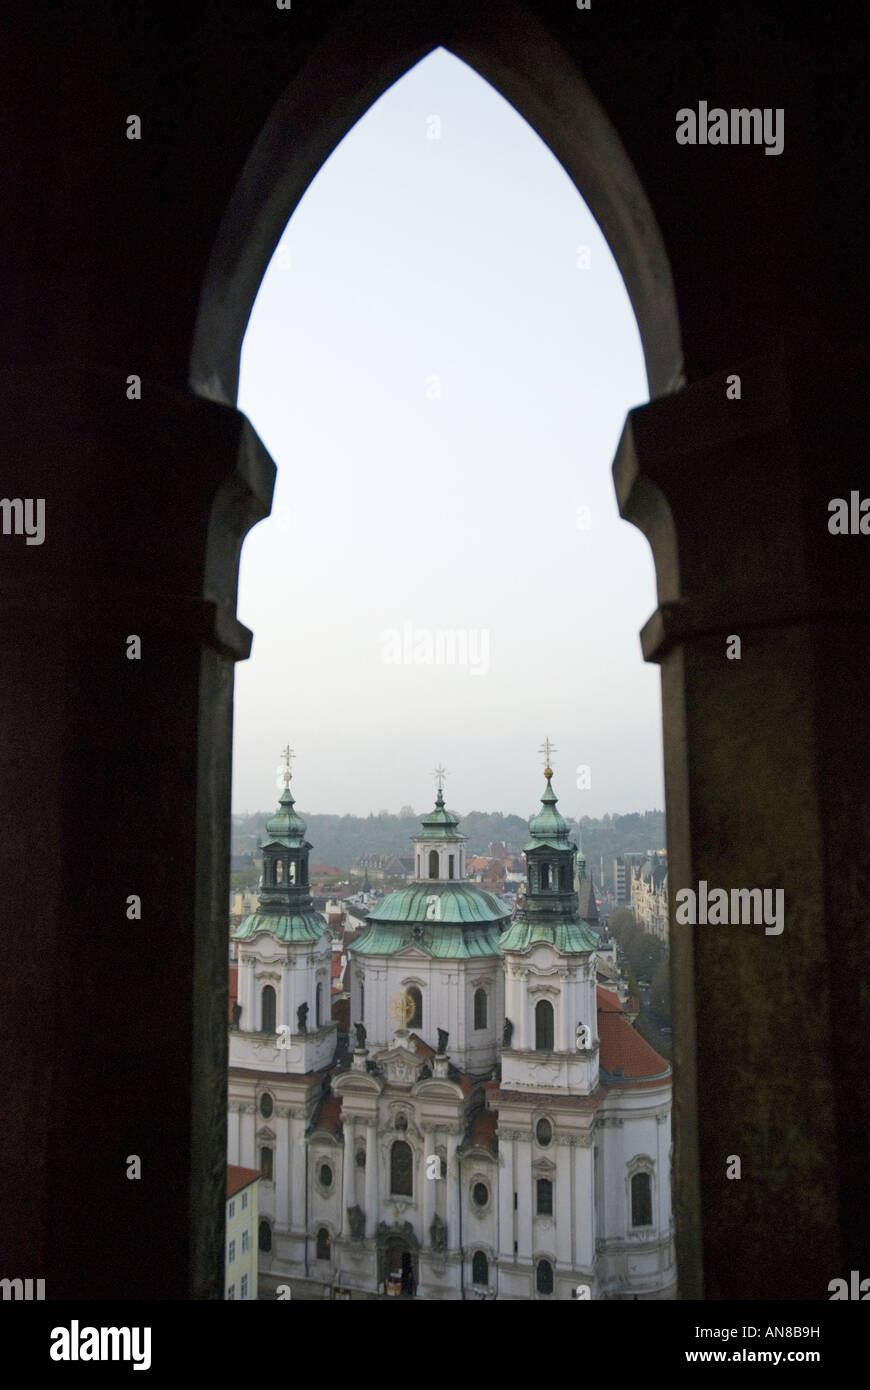 Looking through the arch of the Old Town Hall look out tower in central Prague, Czech Republic. Stock Photo